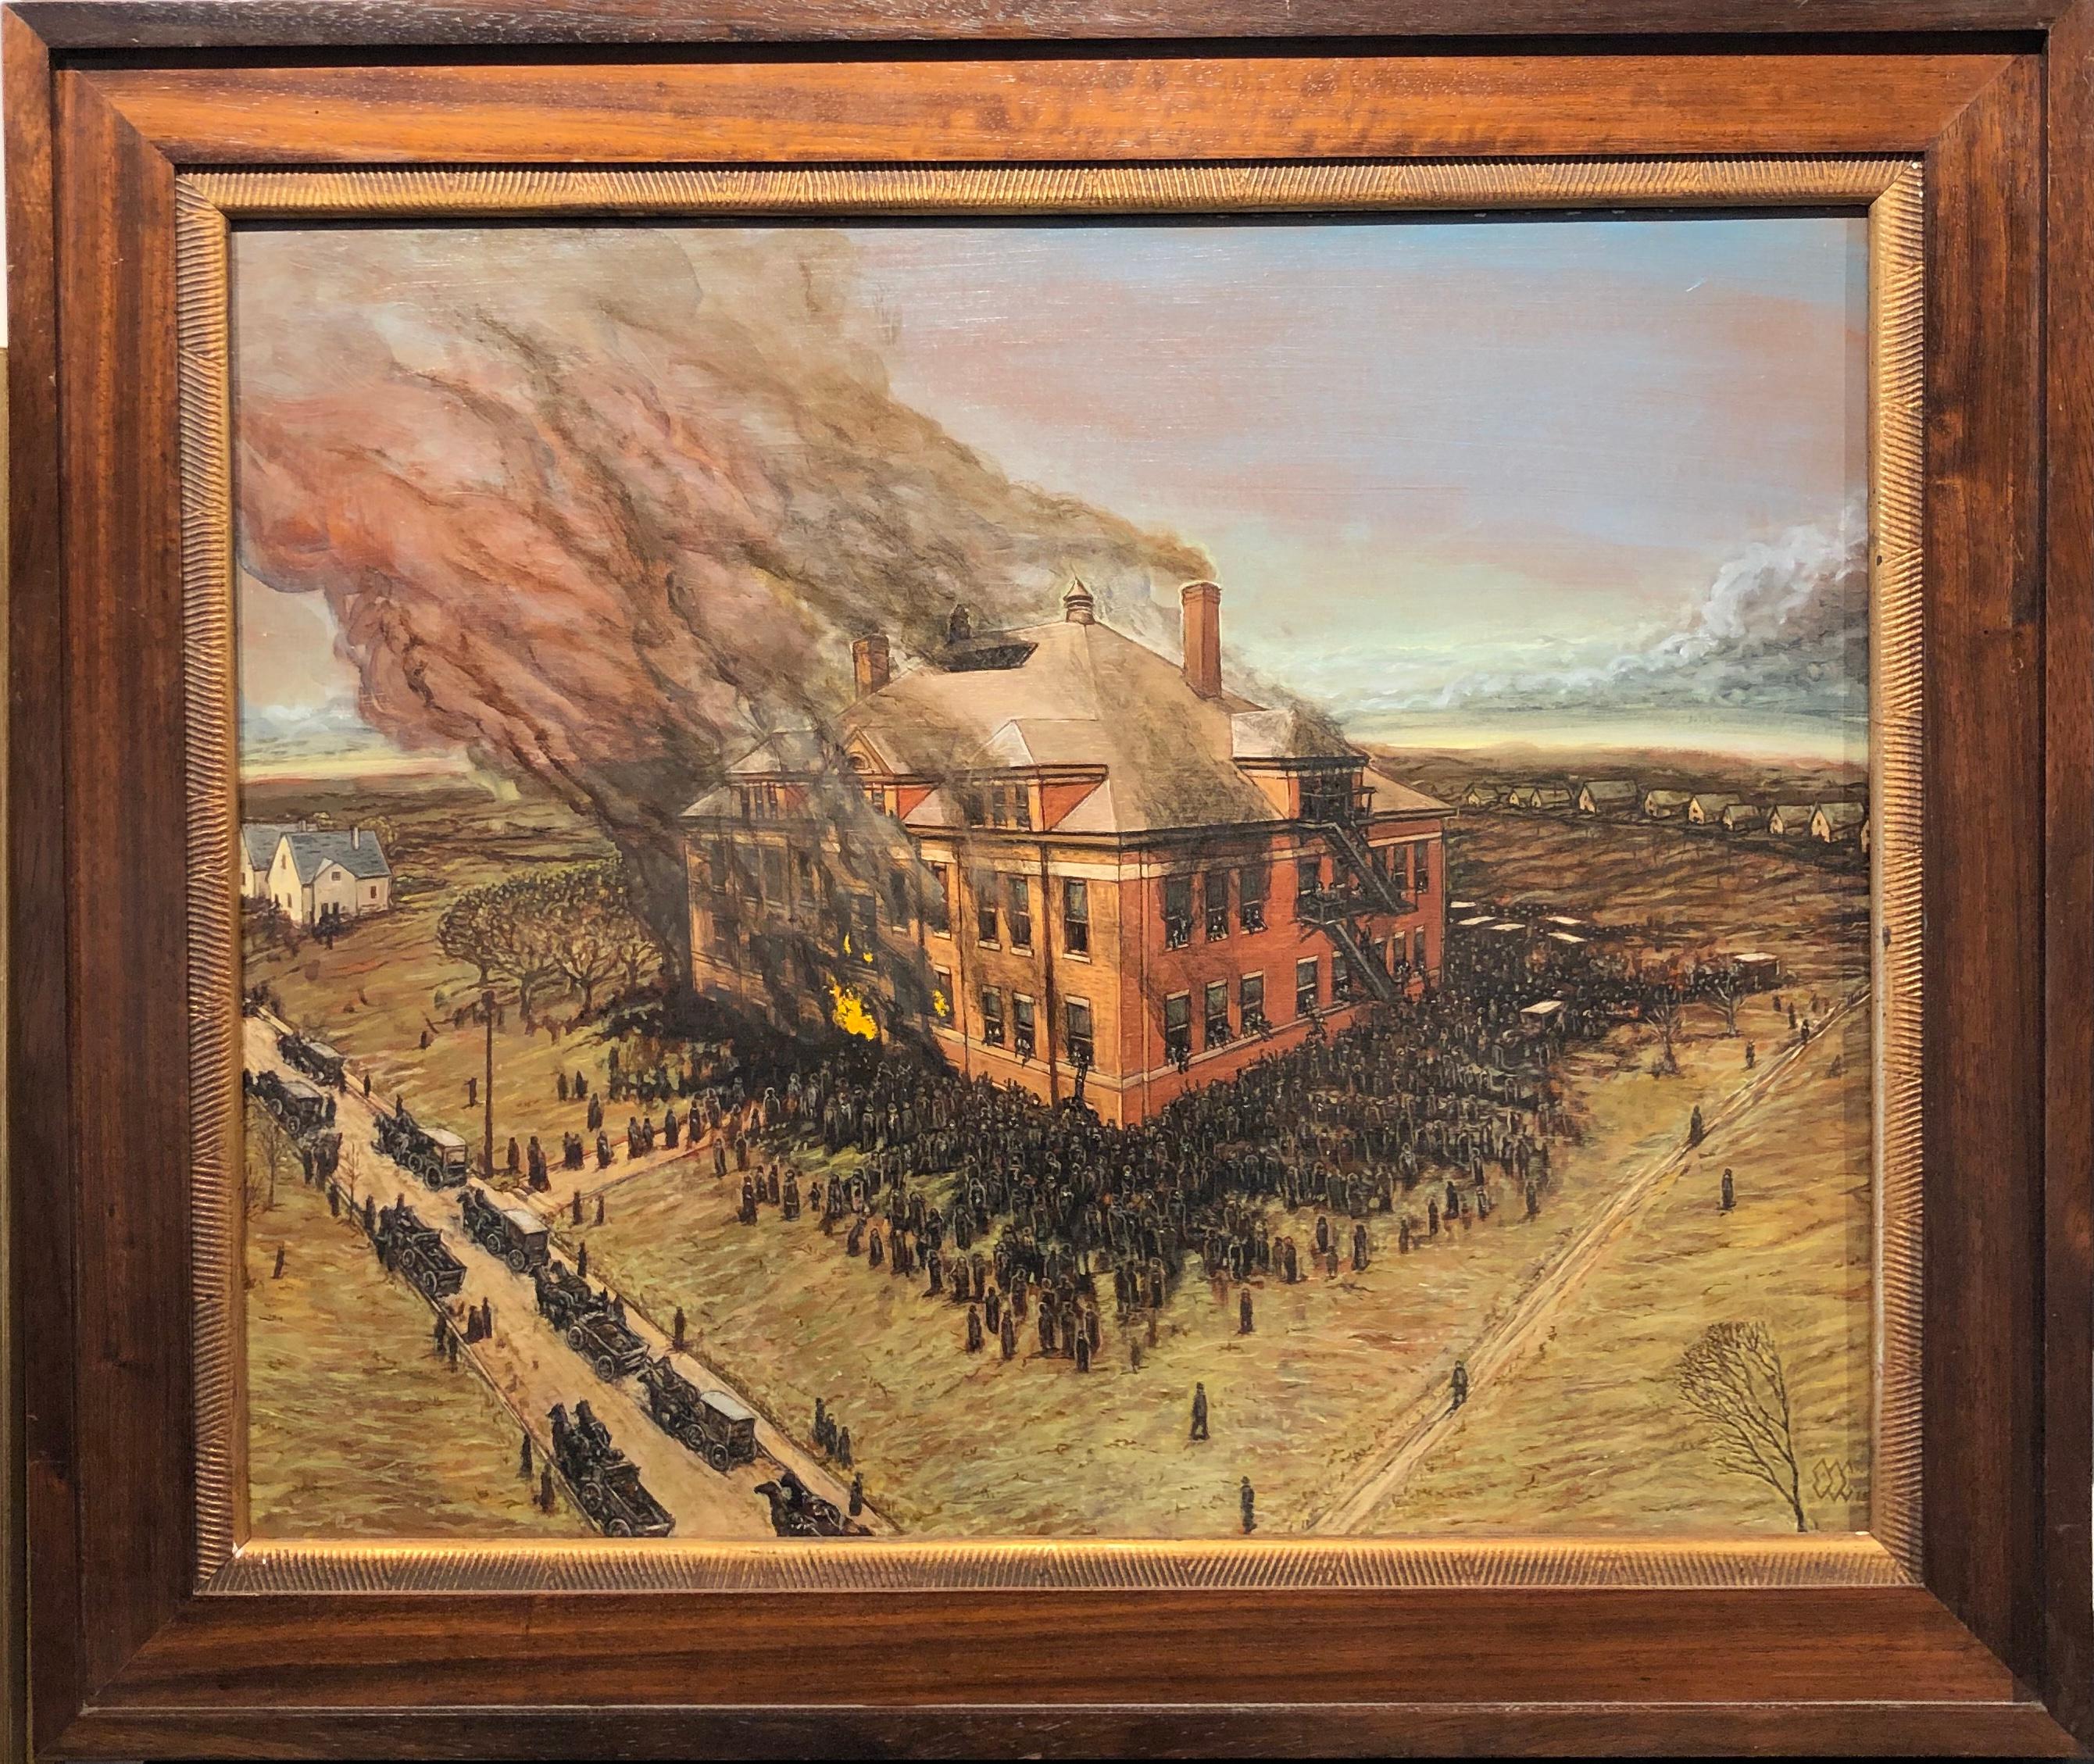 Collinwood School Fire, Collinwood, Ohio, 1908. Oil on Canvas, Framed - Painting by Eric Edward Esper